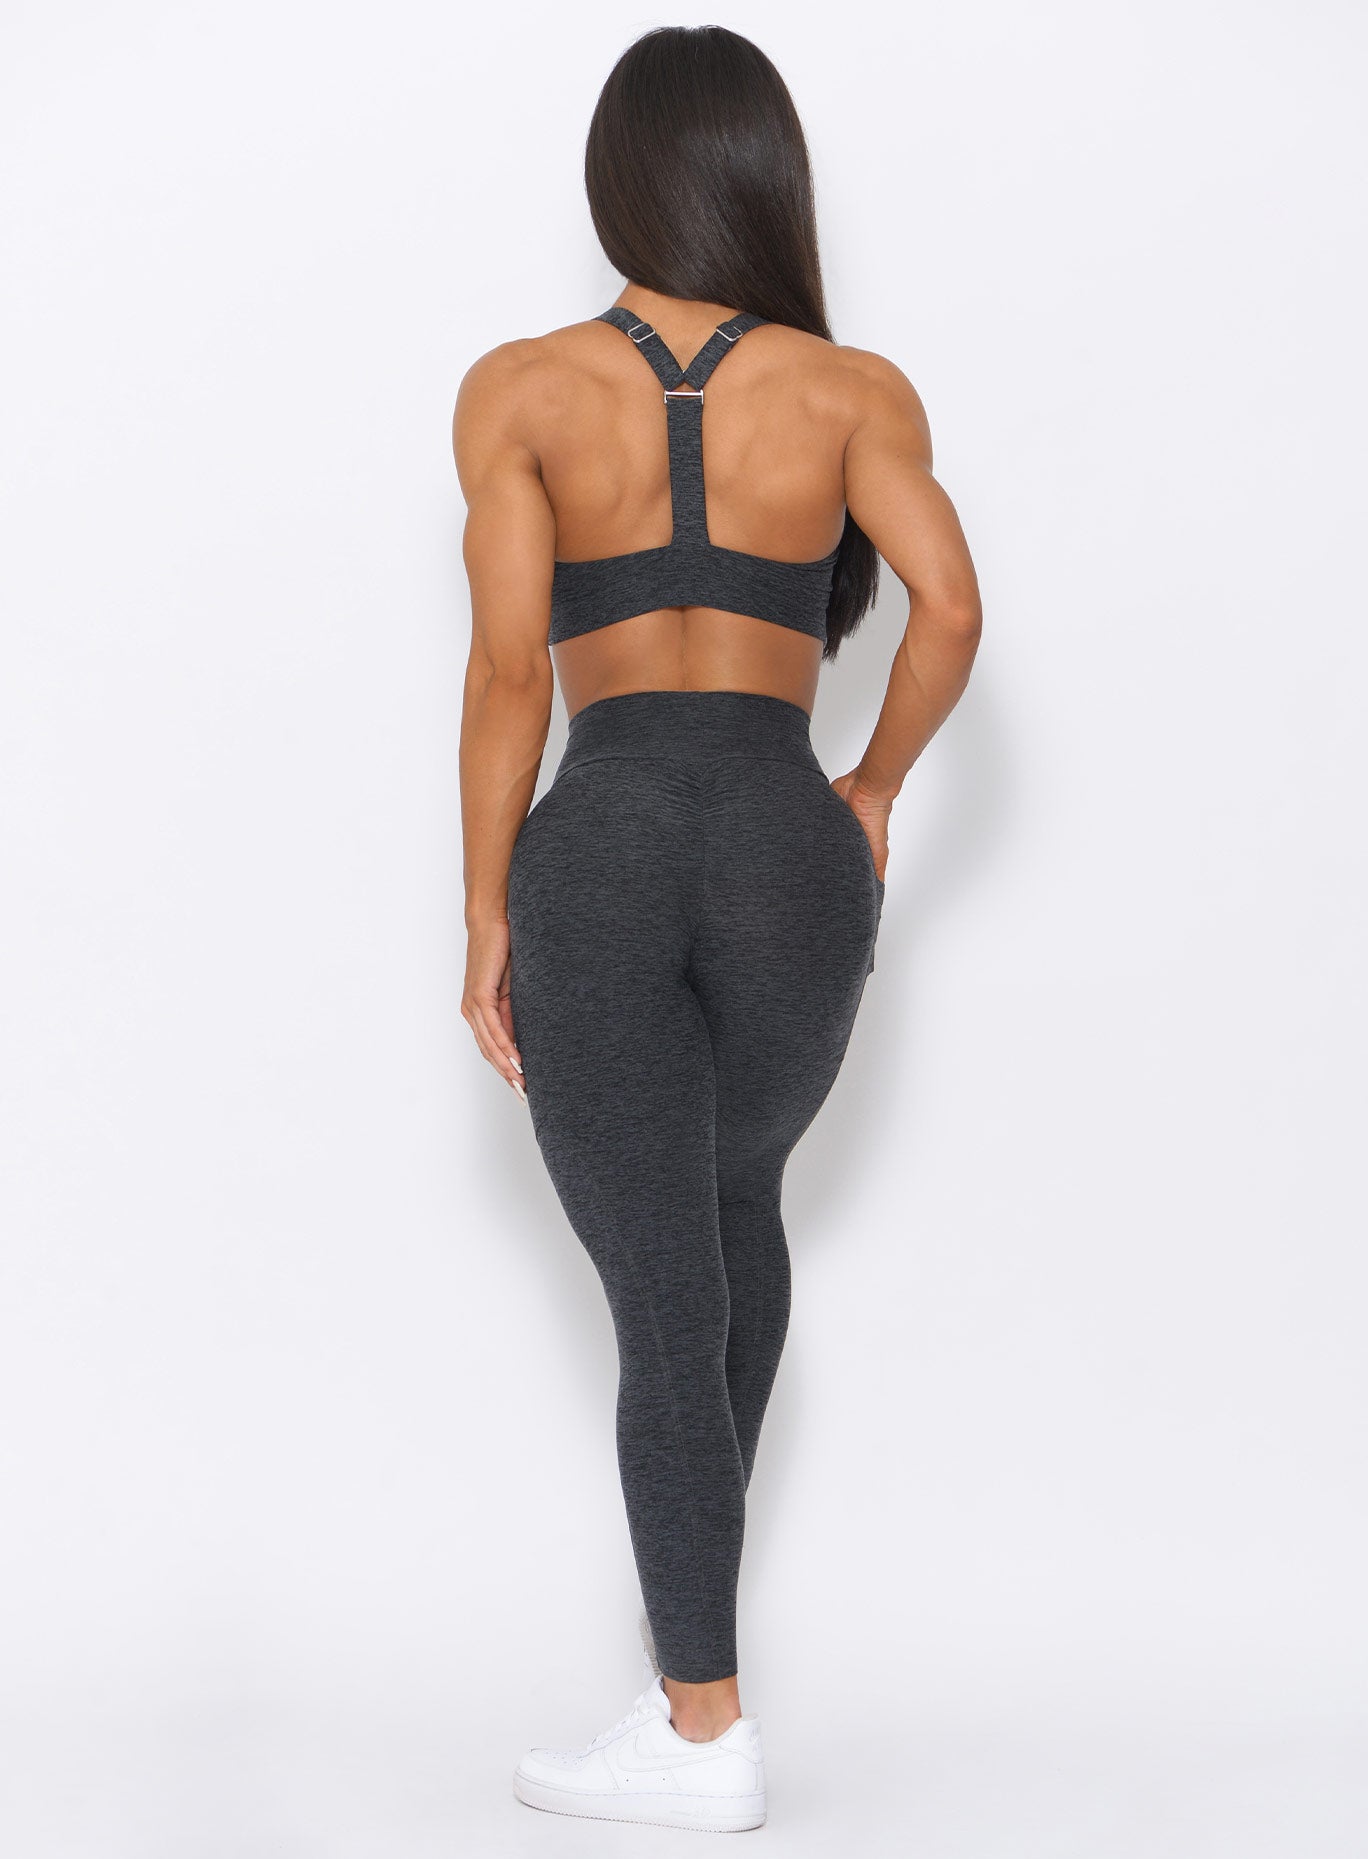 Back view of the model wearing our curves high waist leggings in charcoal color and a matching bra